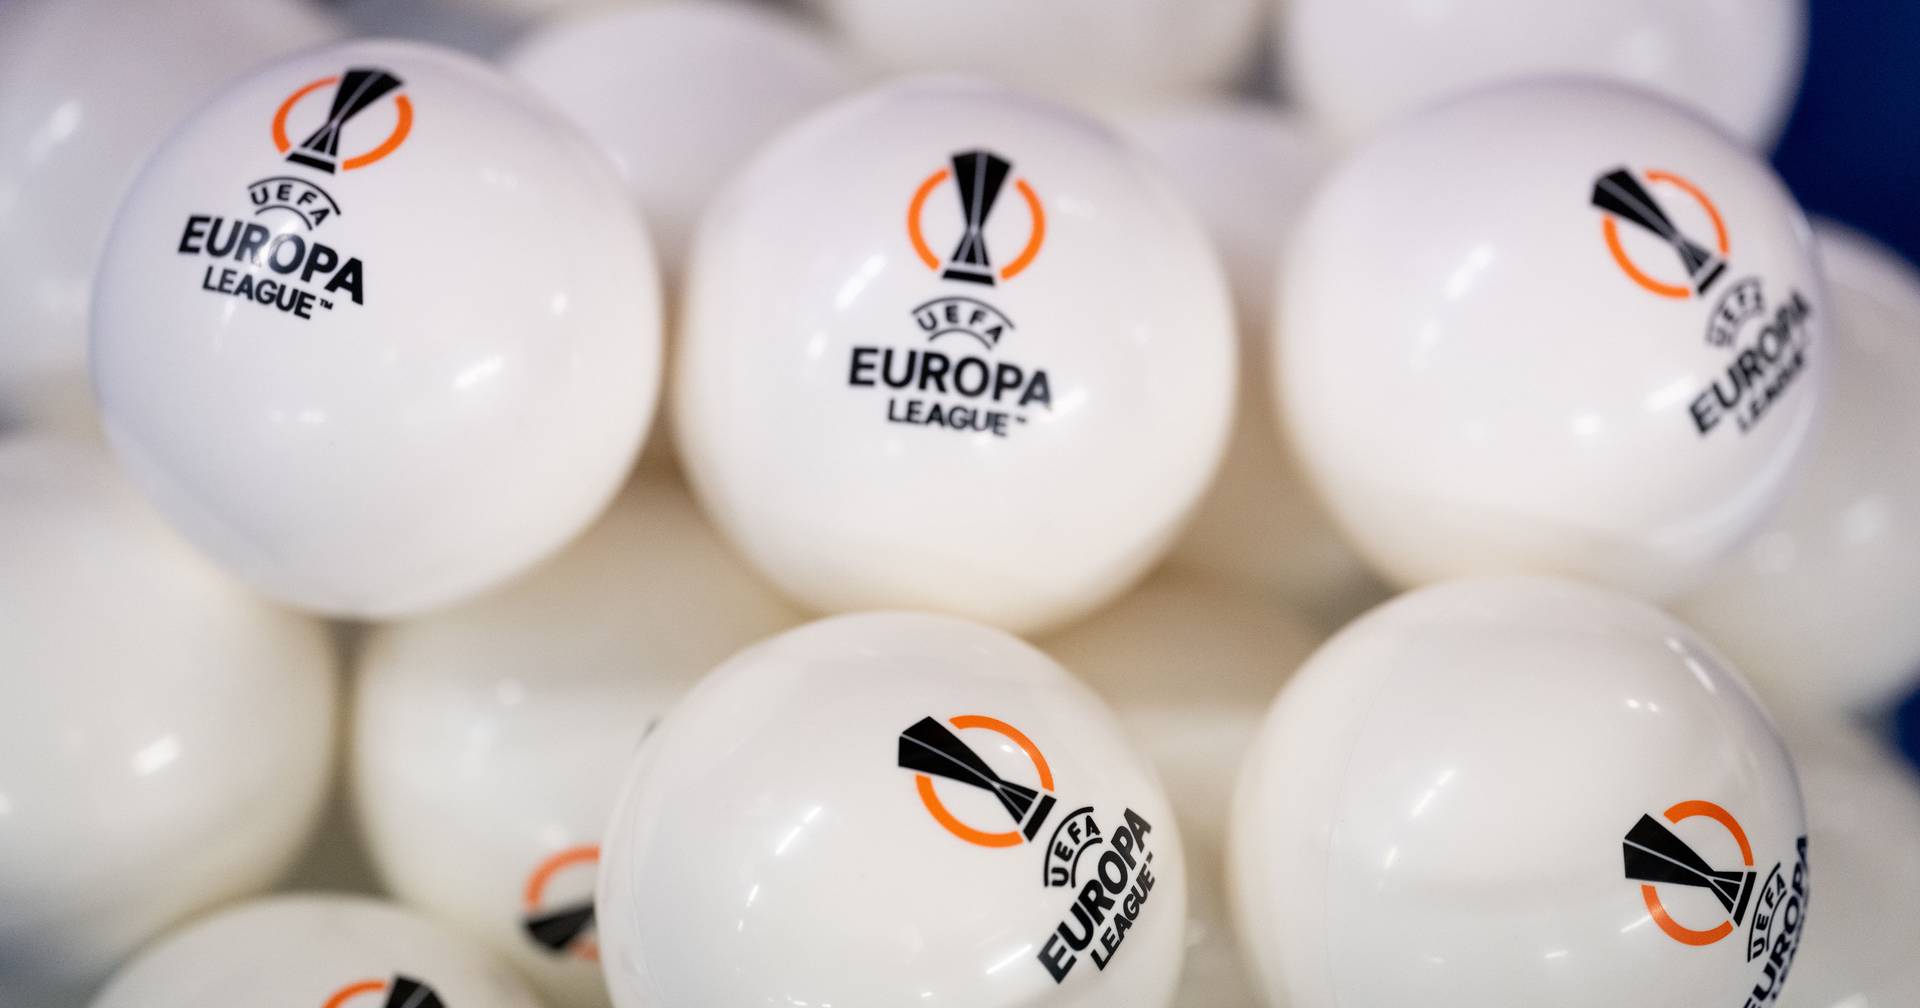 The Europa League draw reveals the rivals of Sporting, Benfica and Braga